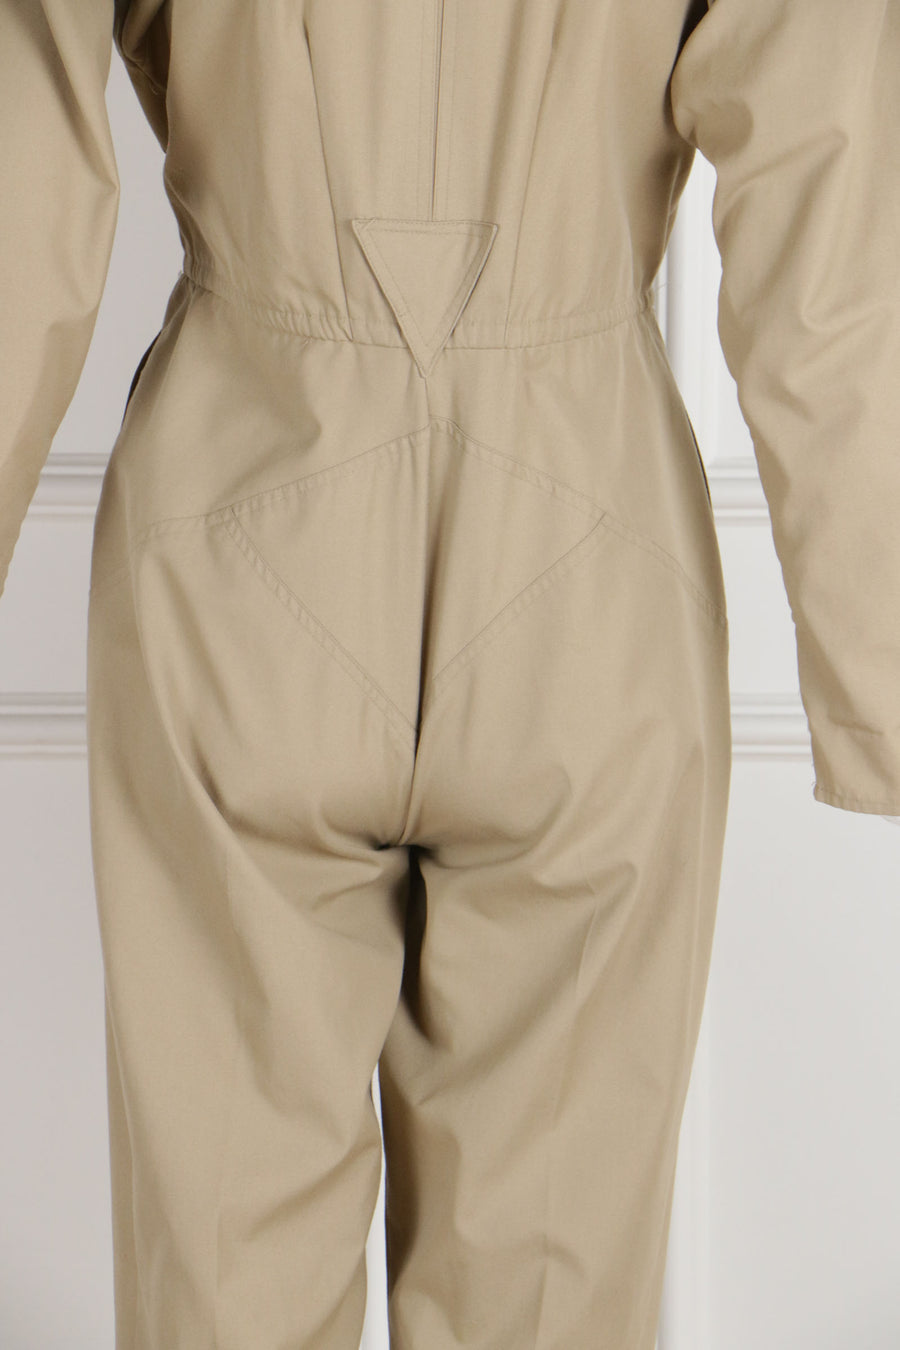 JH Vintage : ACT I NEW YORK Tan Jumpsuit